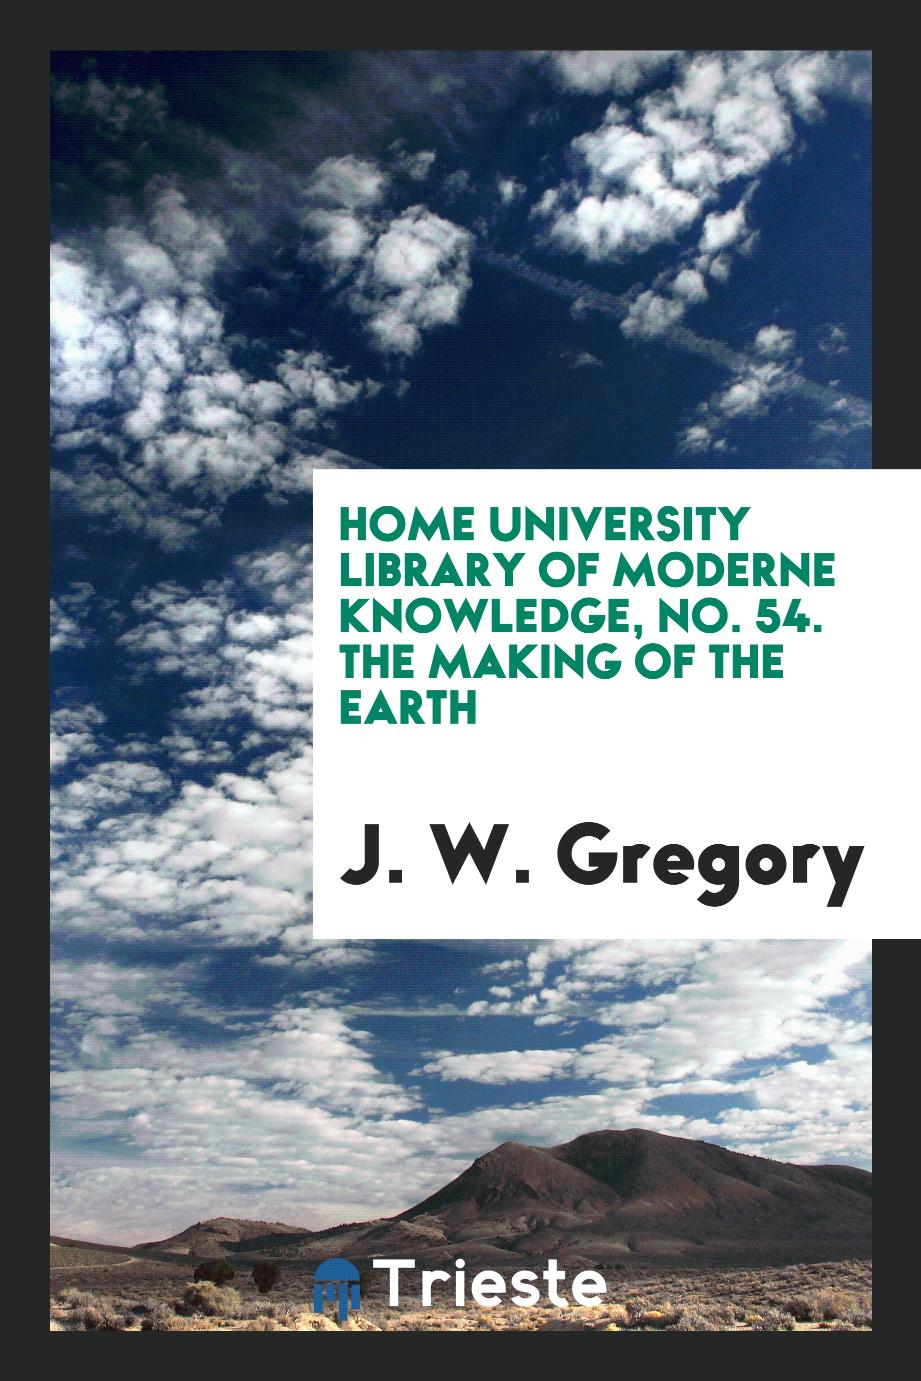 Home university library of moderne knowledge, No. 54. The making of the earth